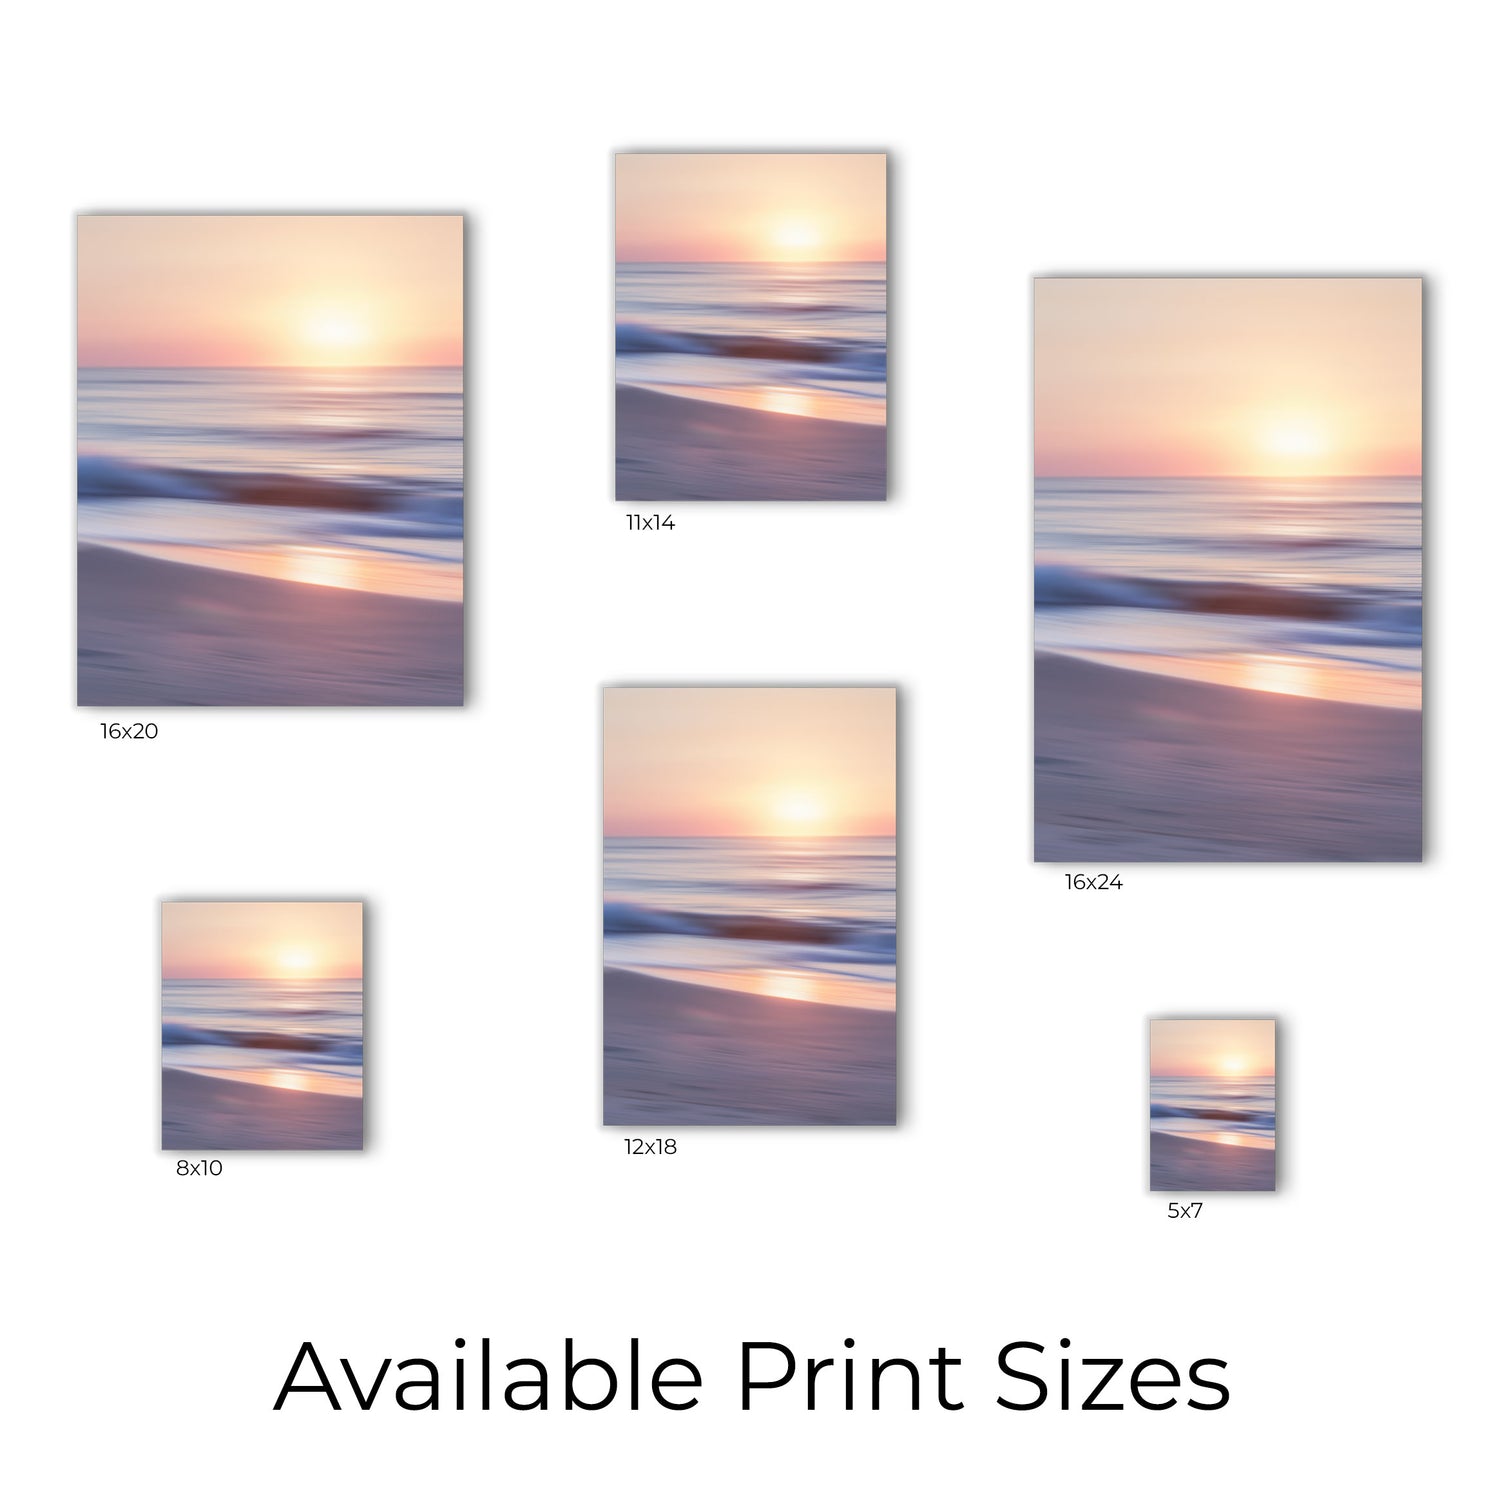 Abstract-style Ocean Sunrise print, image displays the range of sizes available."